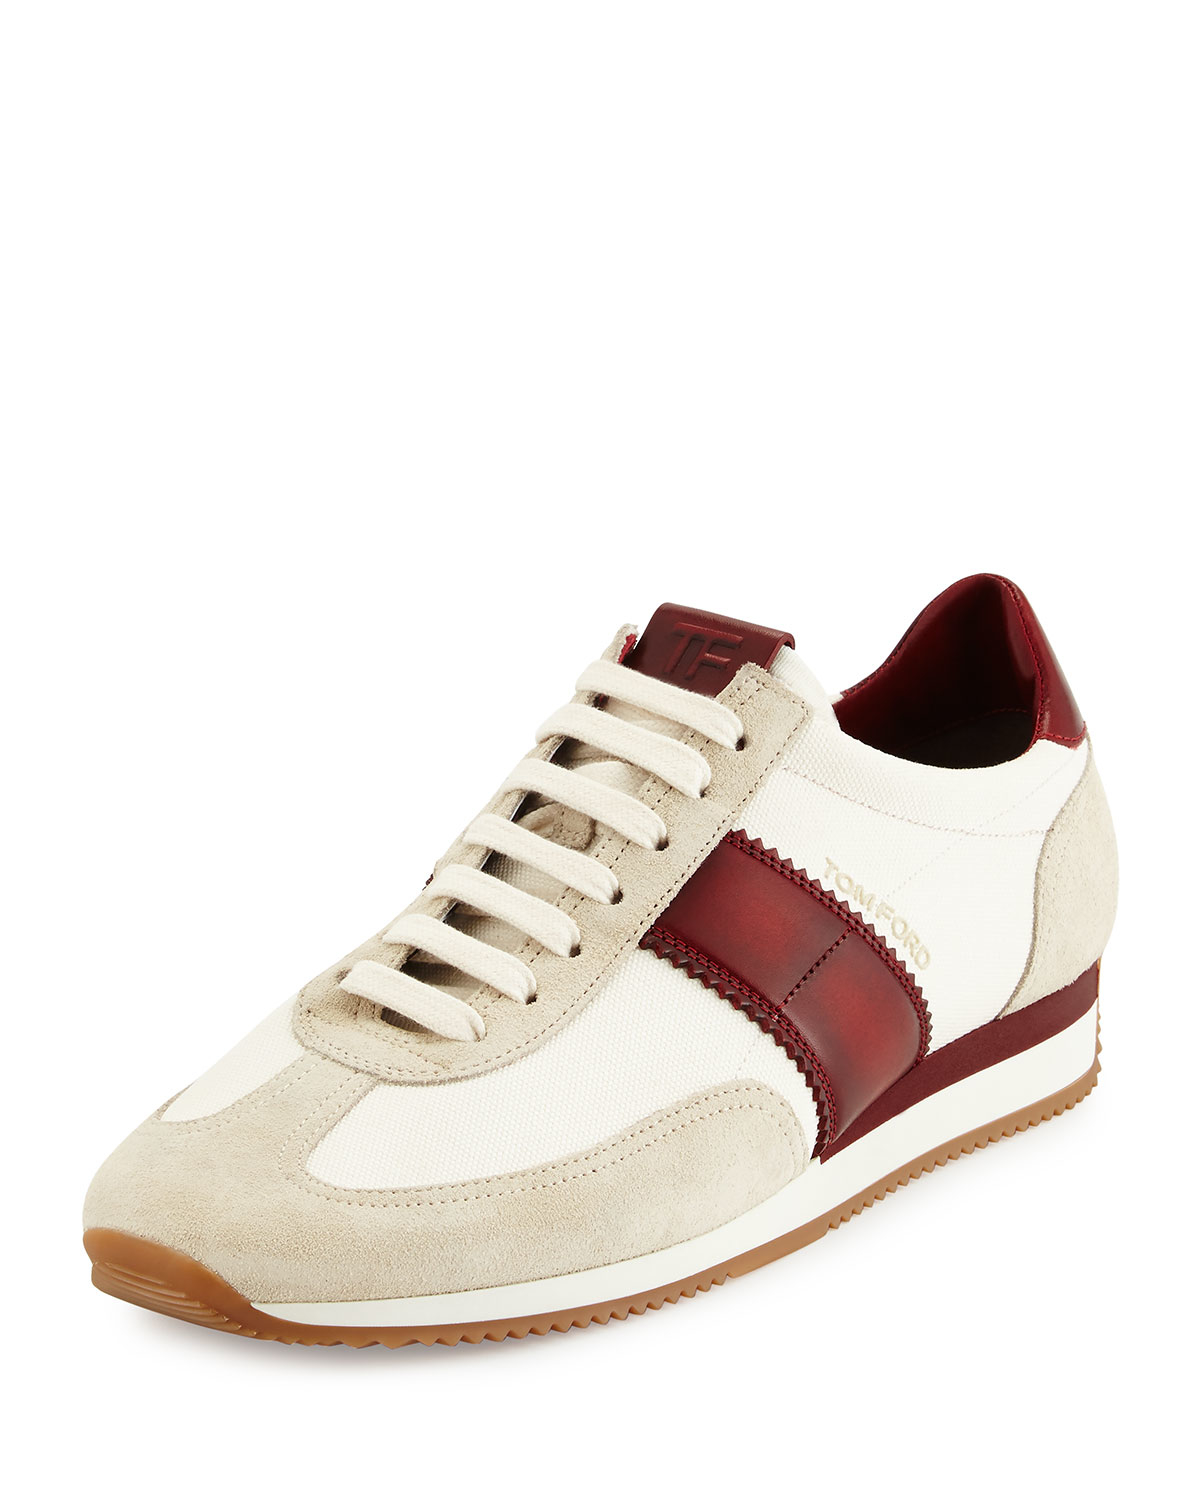 Tom Ford Orford Colorblock Trainer Sneaker in White for Men - Lyst